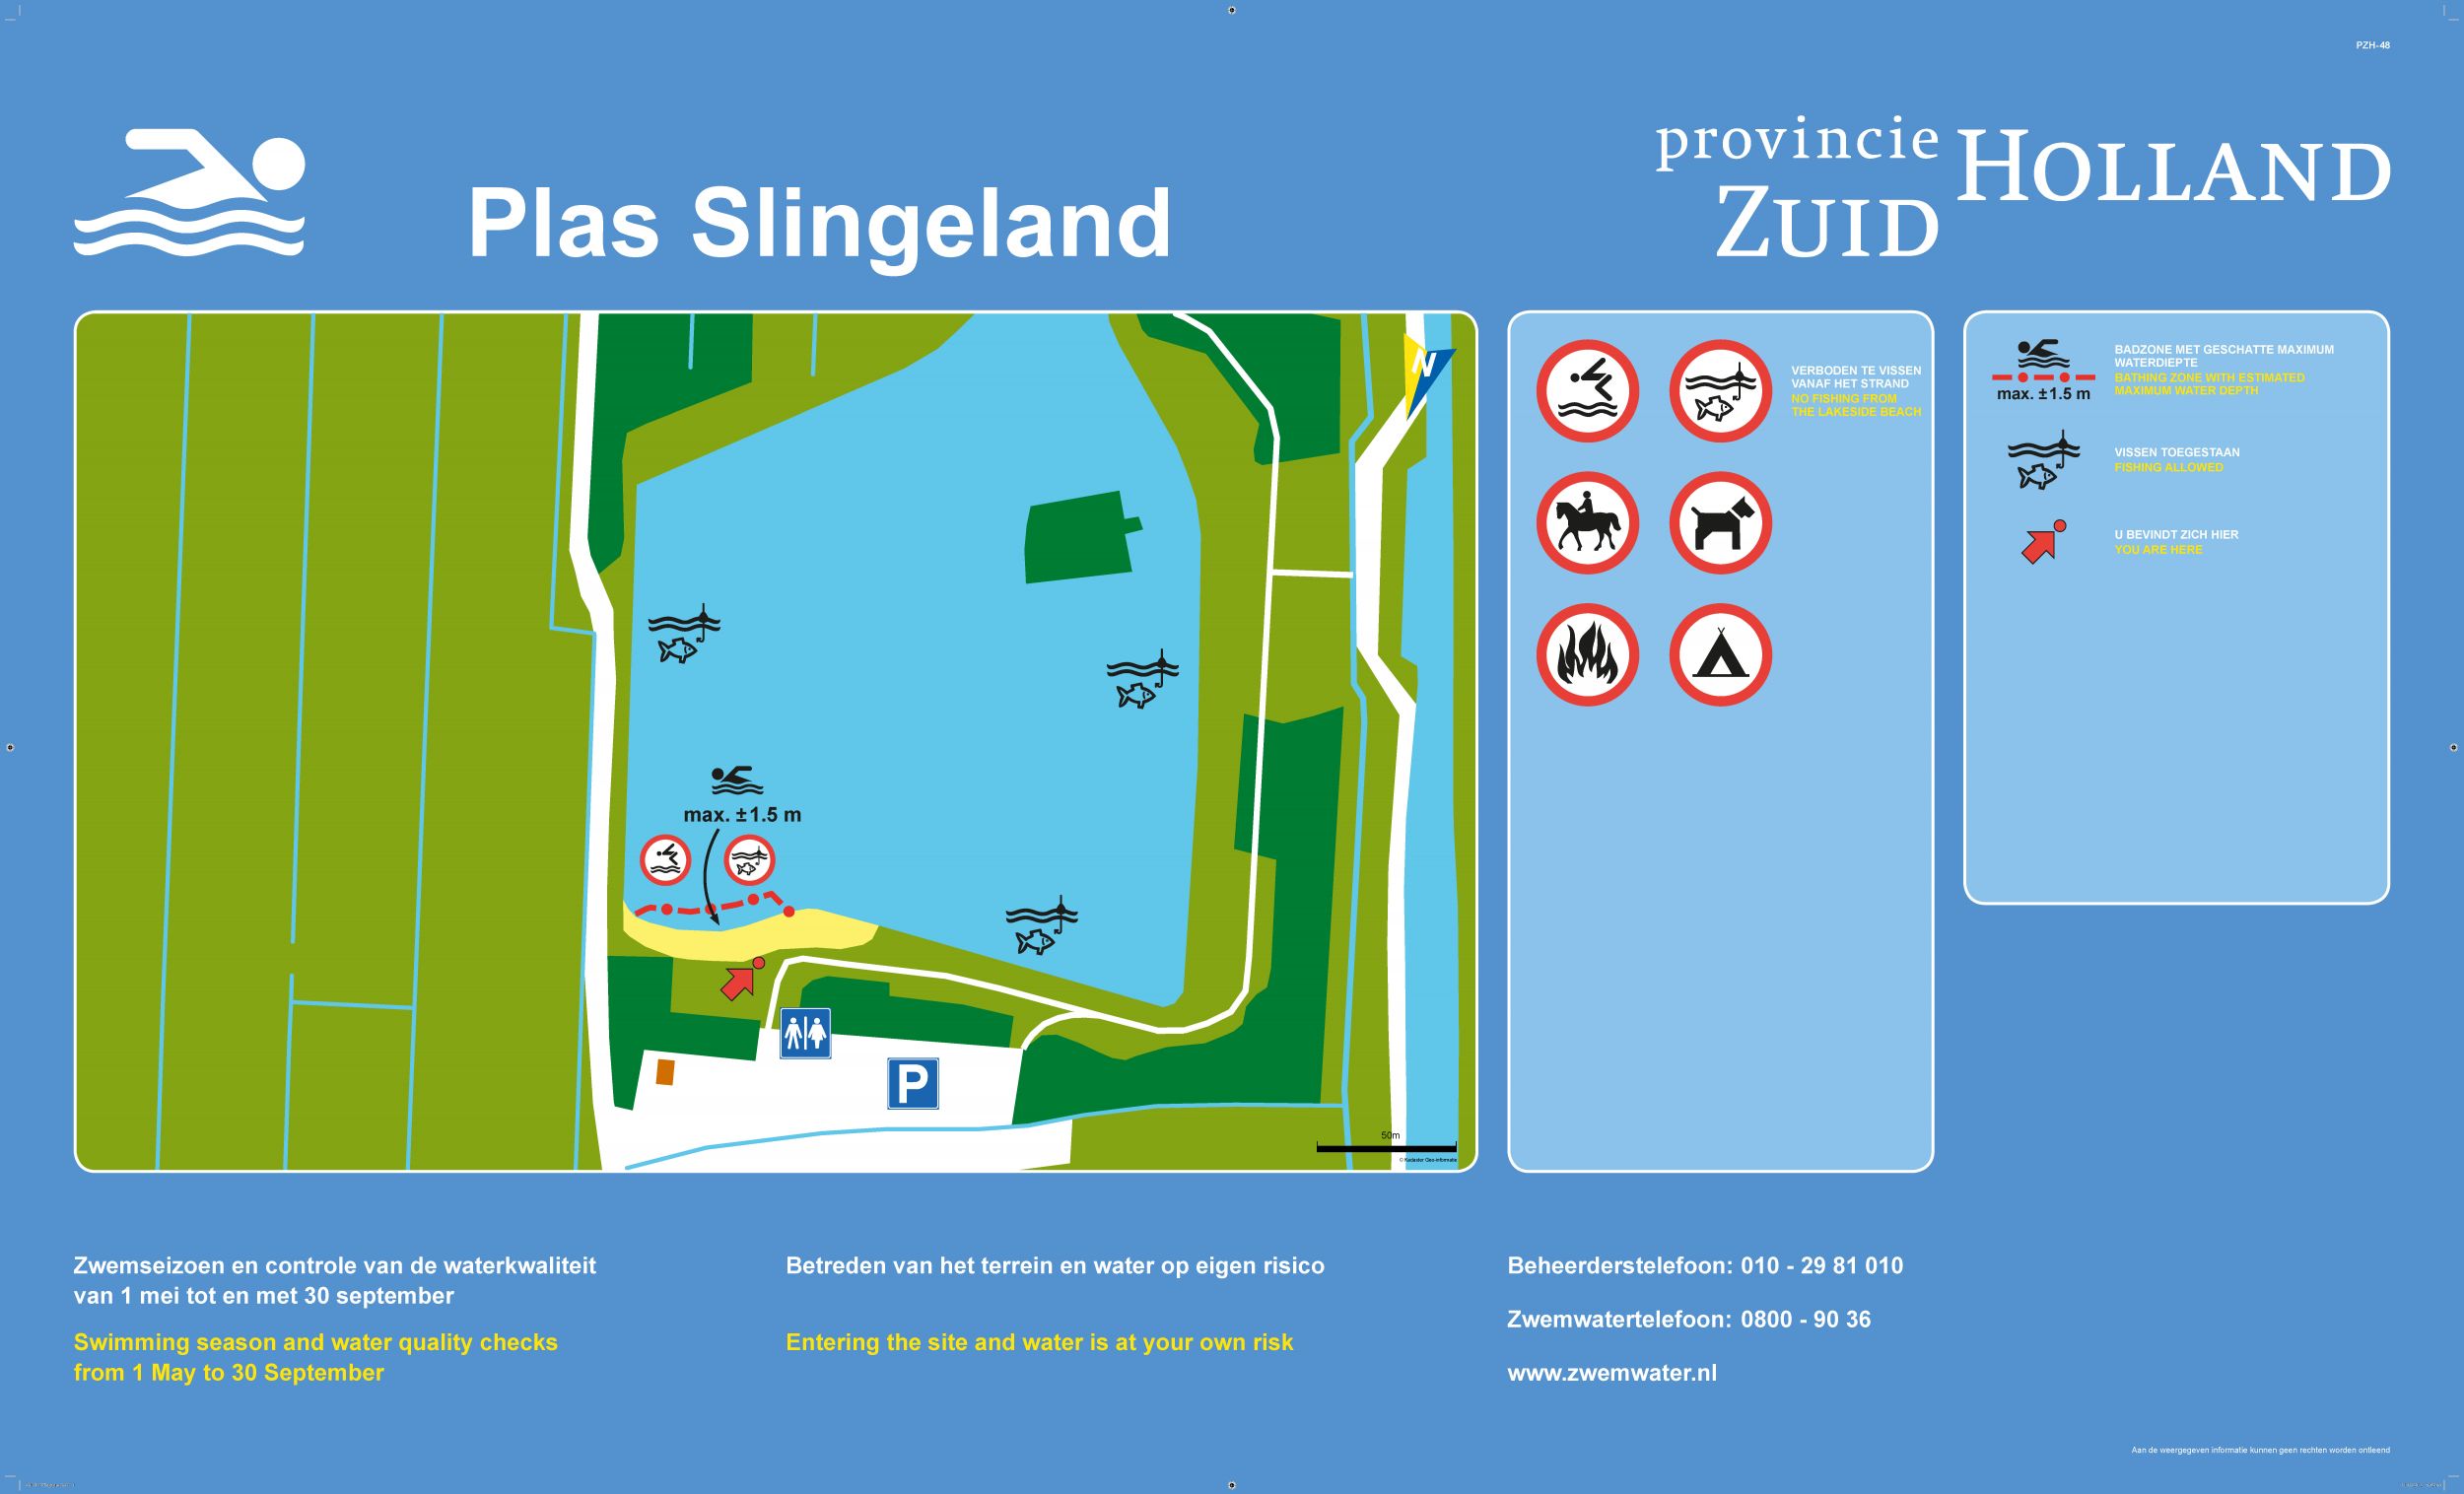 The information board at the swimming location Plas Slingeland